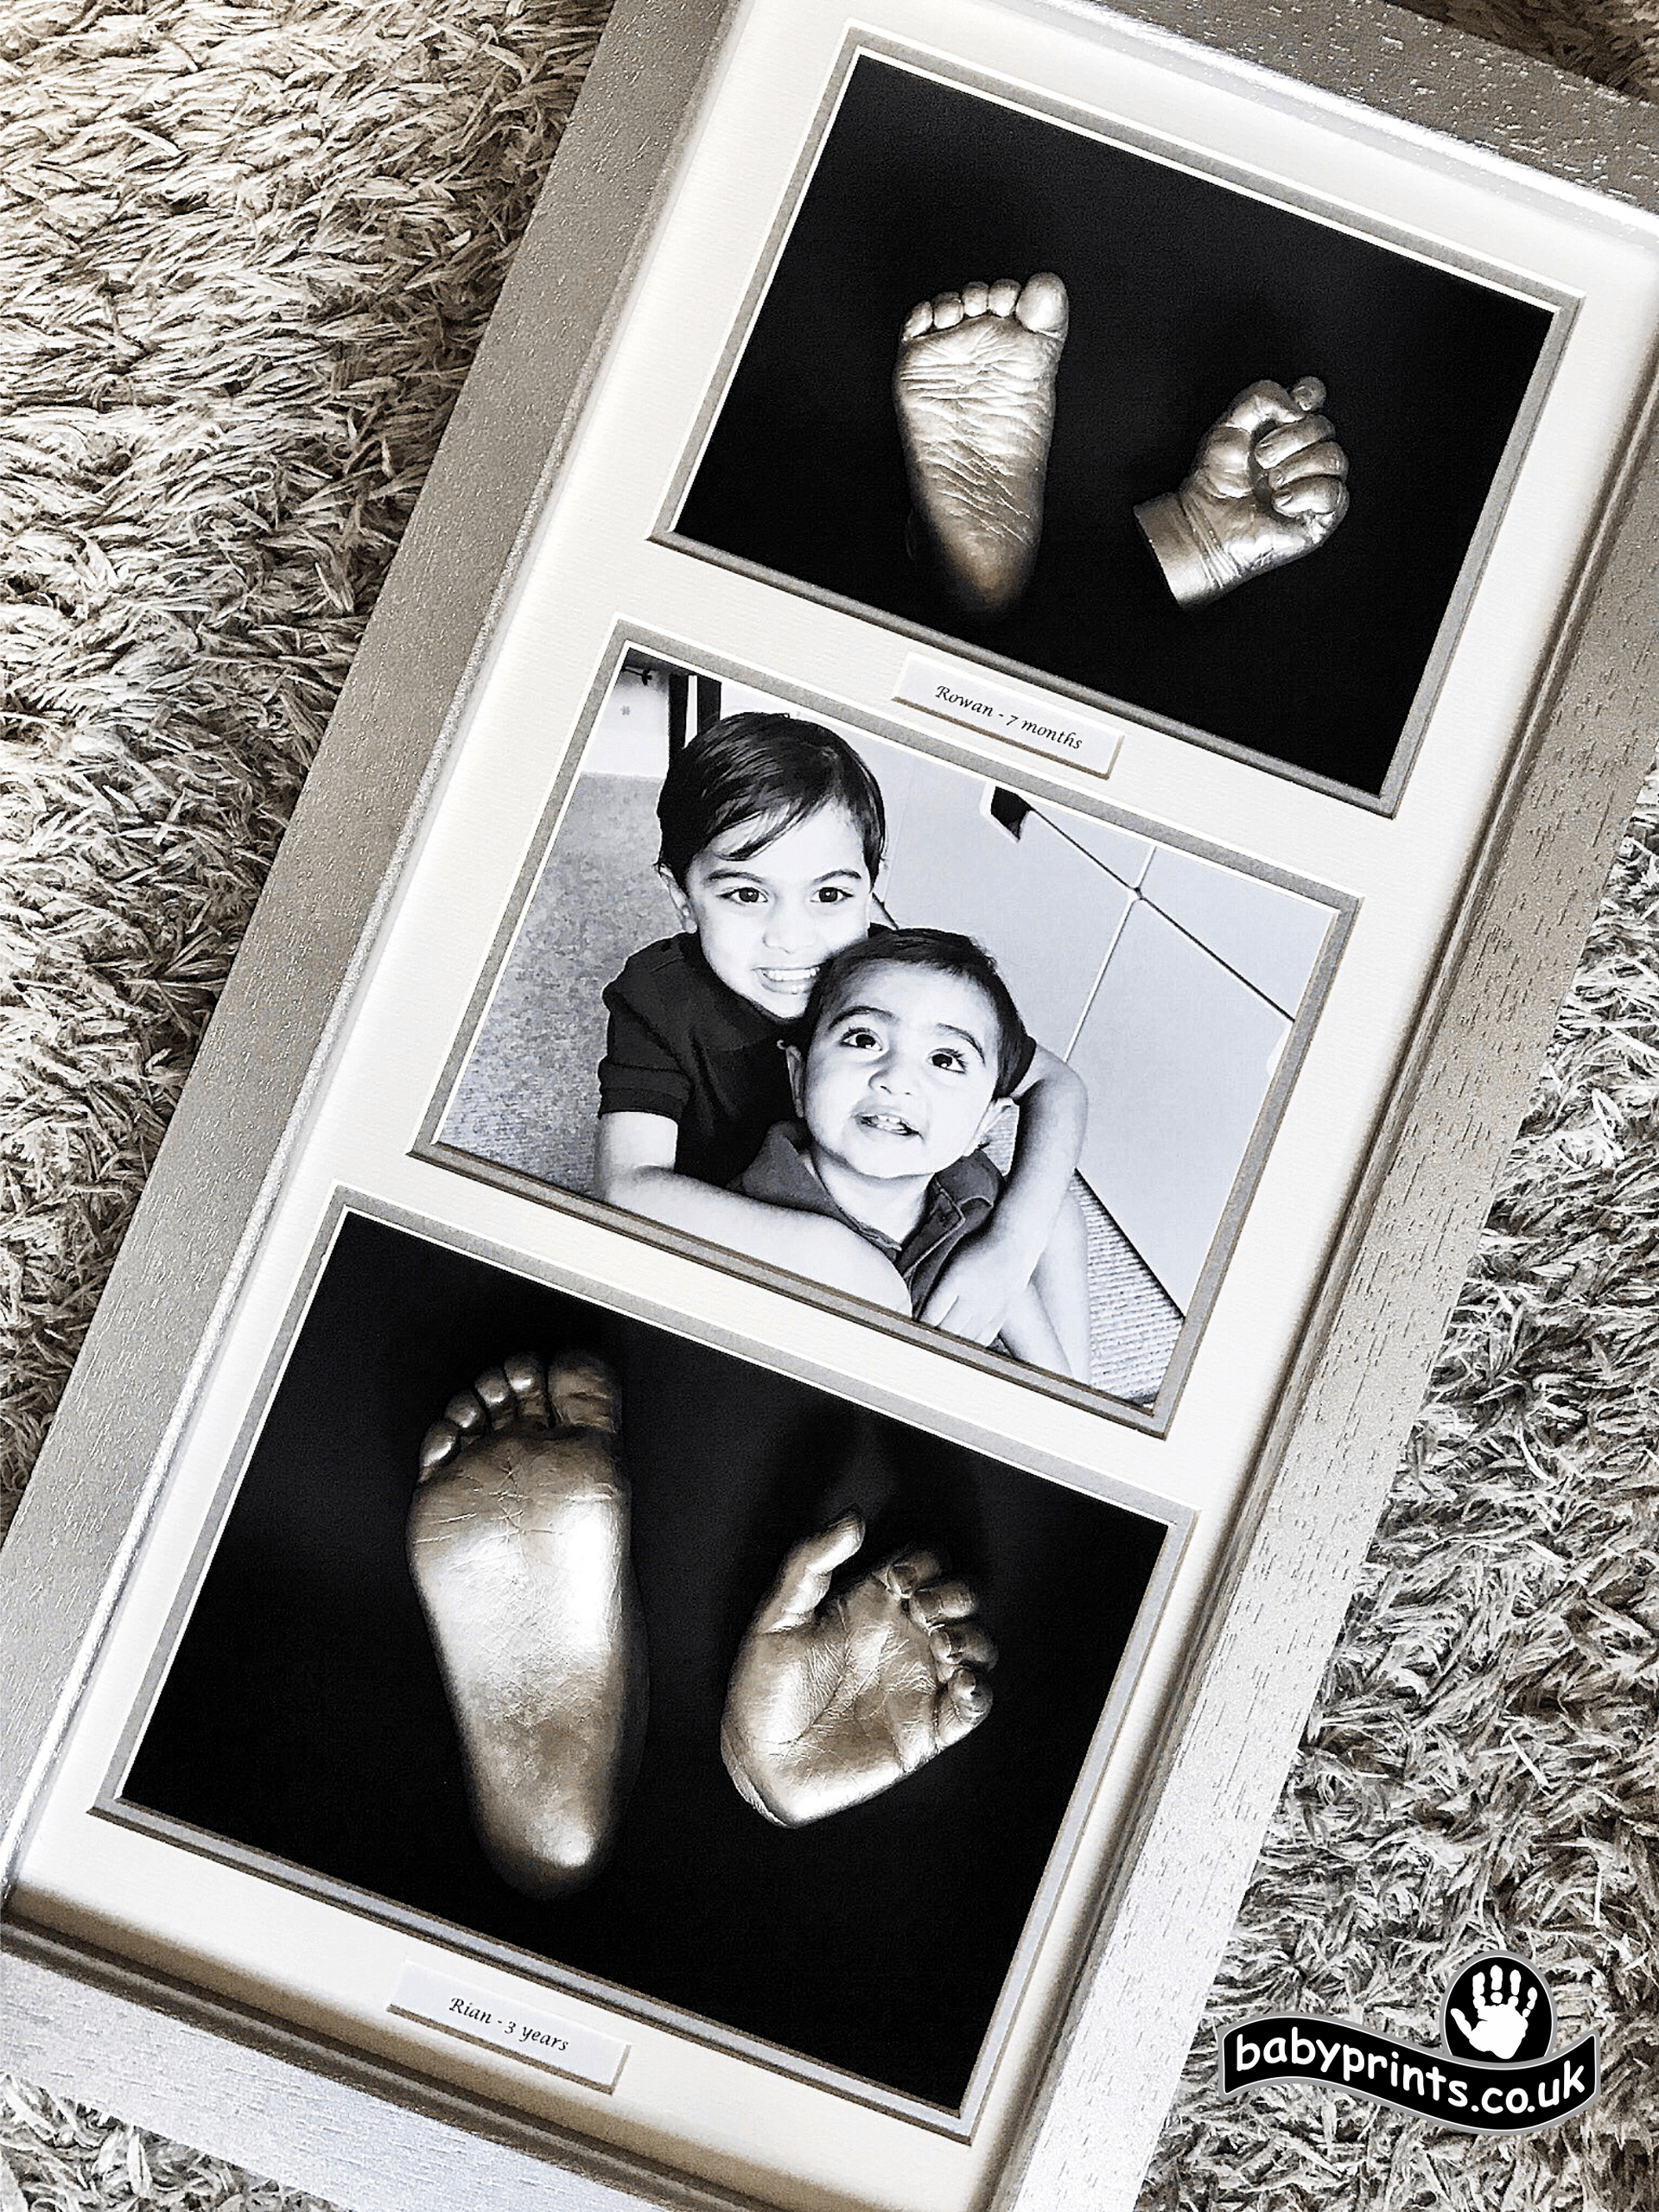 Brothers foot and hand casting in a frame